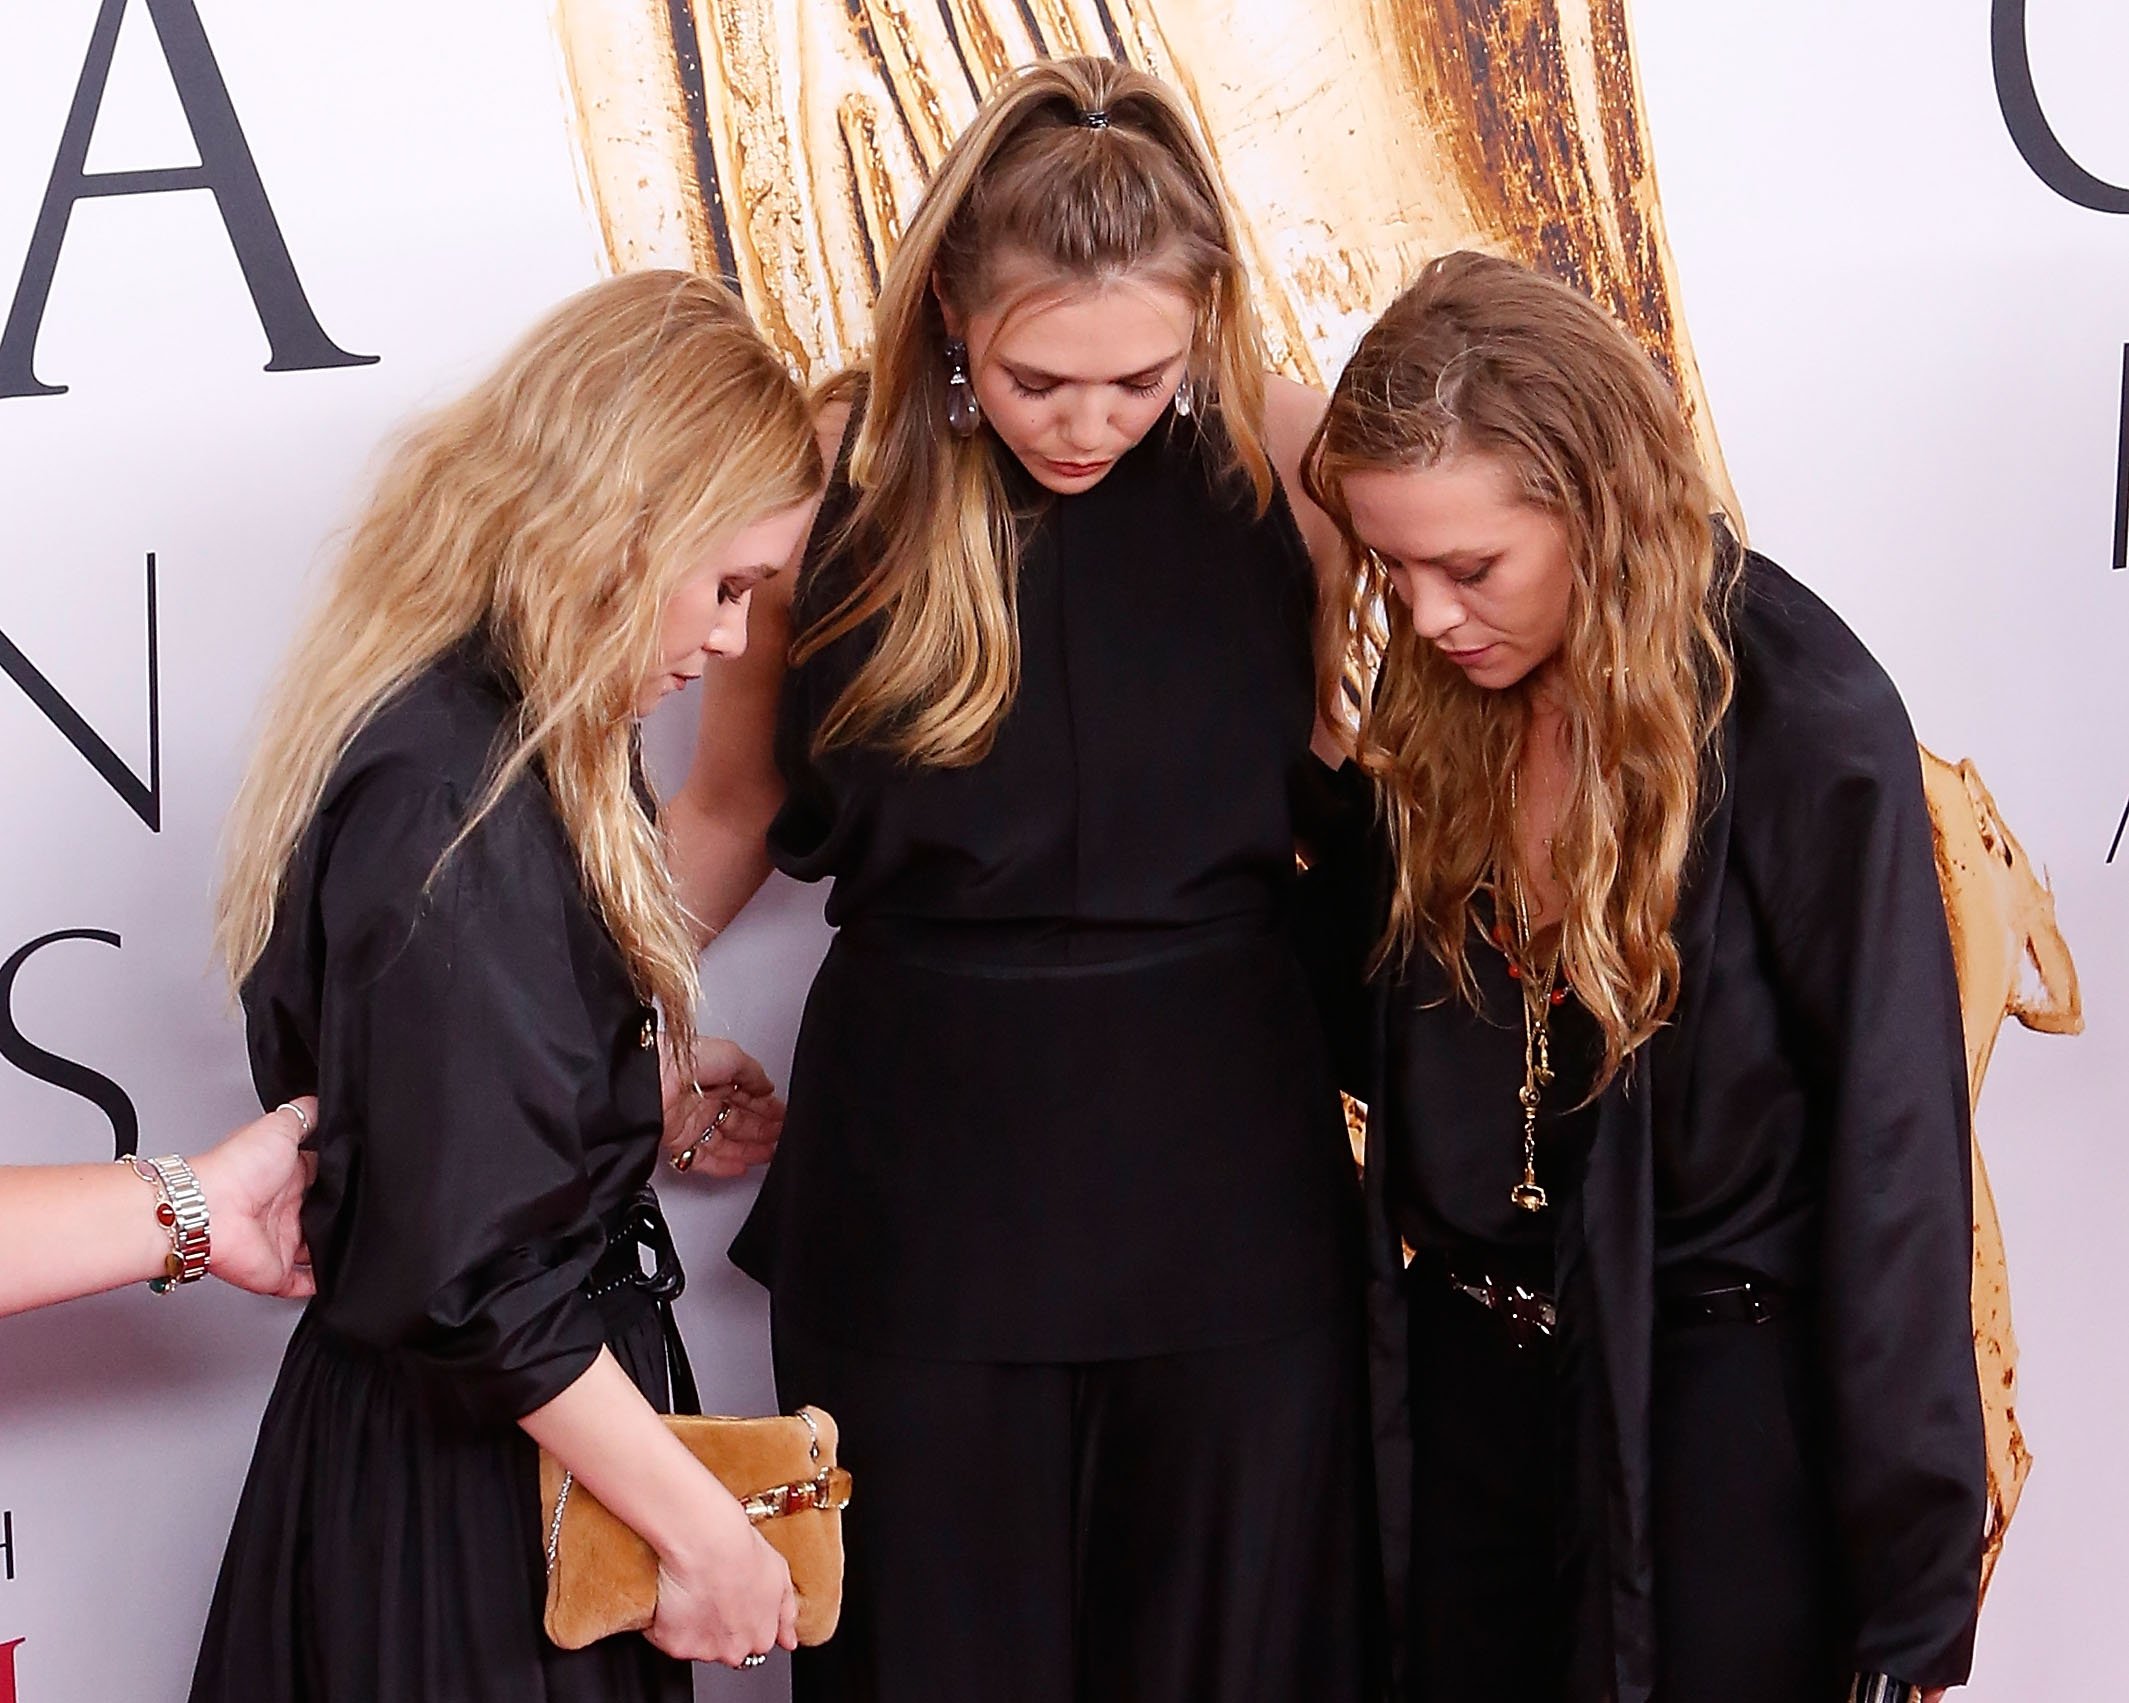 Elizabeth Olsen holding her head down next to Mary-Kate and Ashley Olsen while wearing all black.